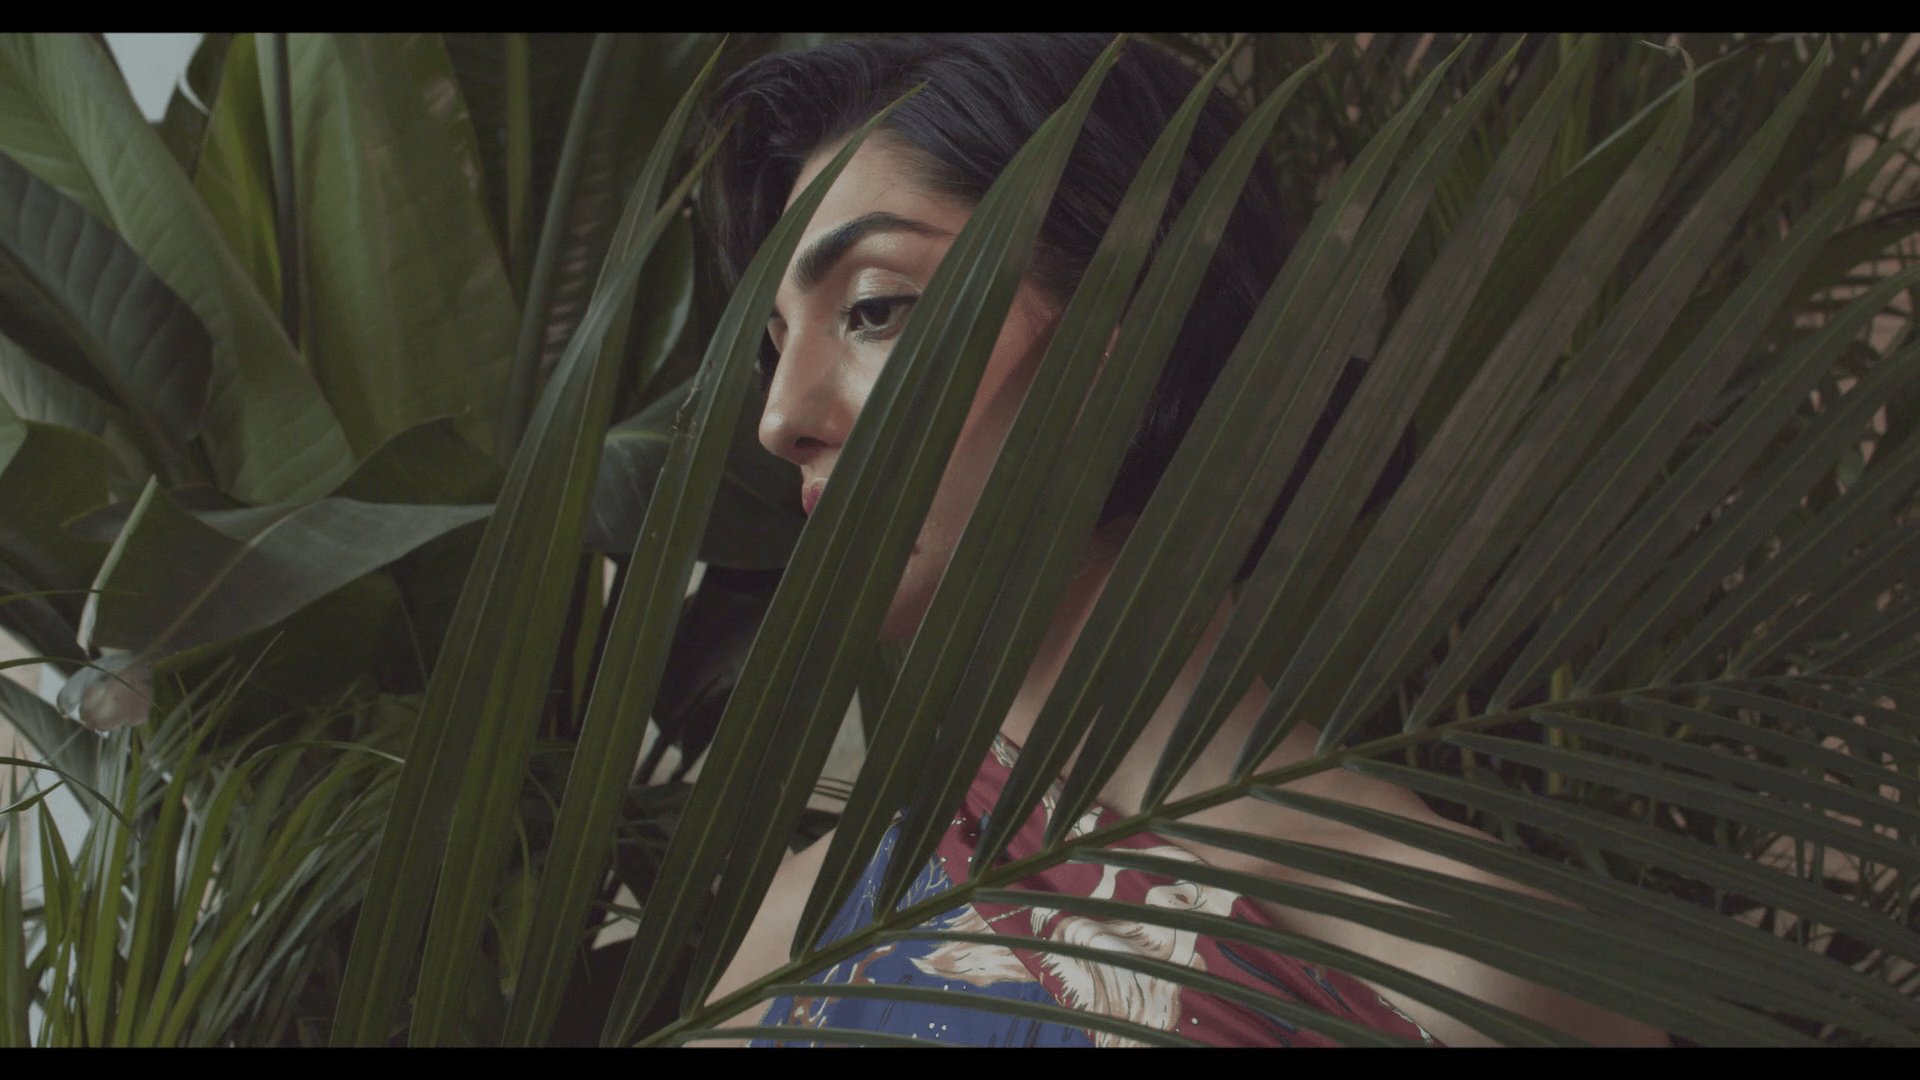 A model is partly obscured by a tropical plant